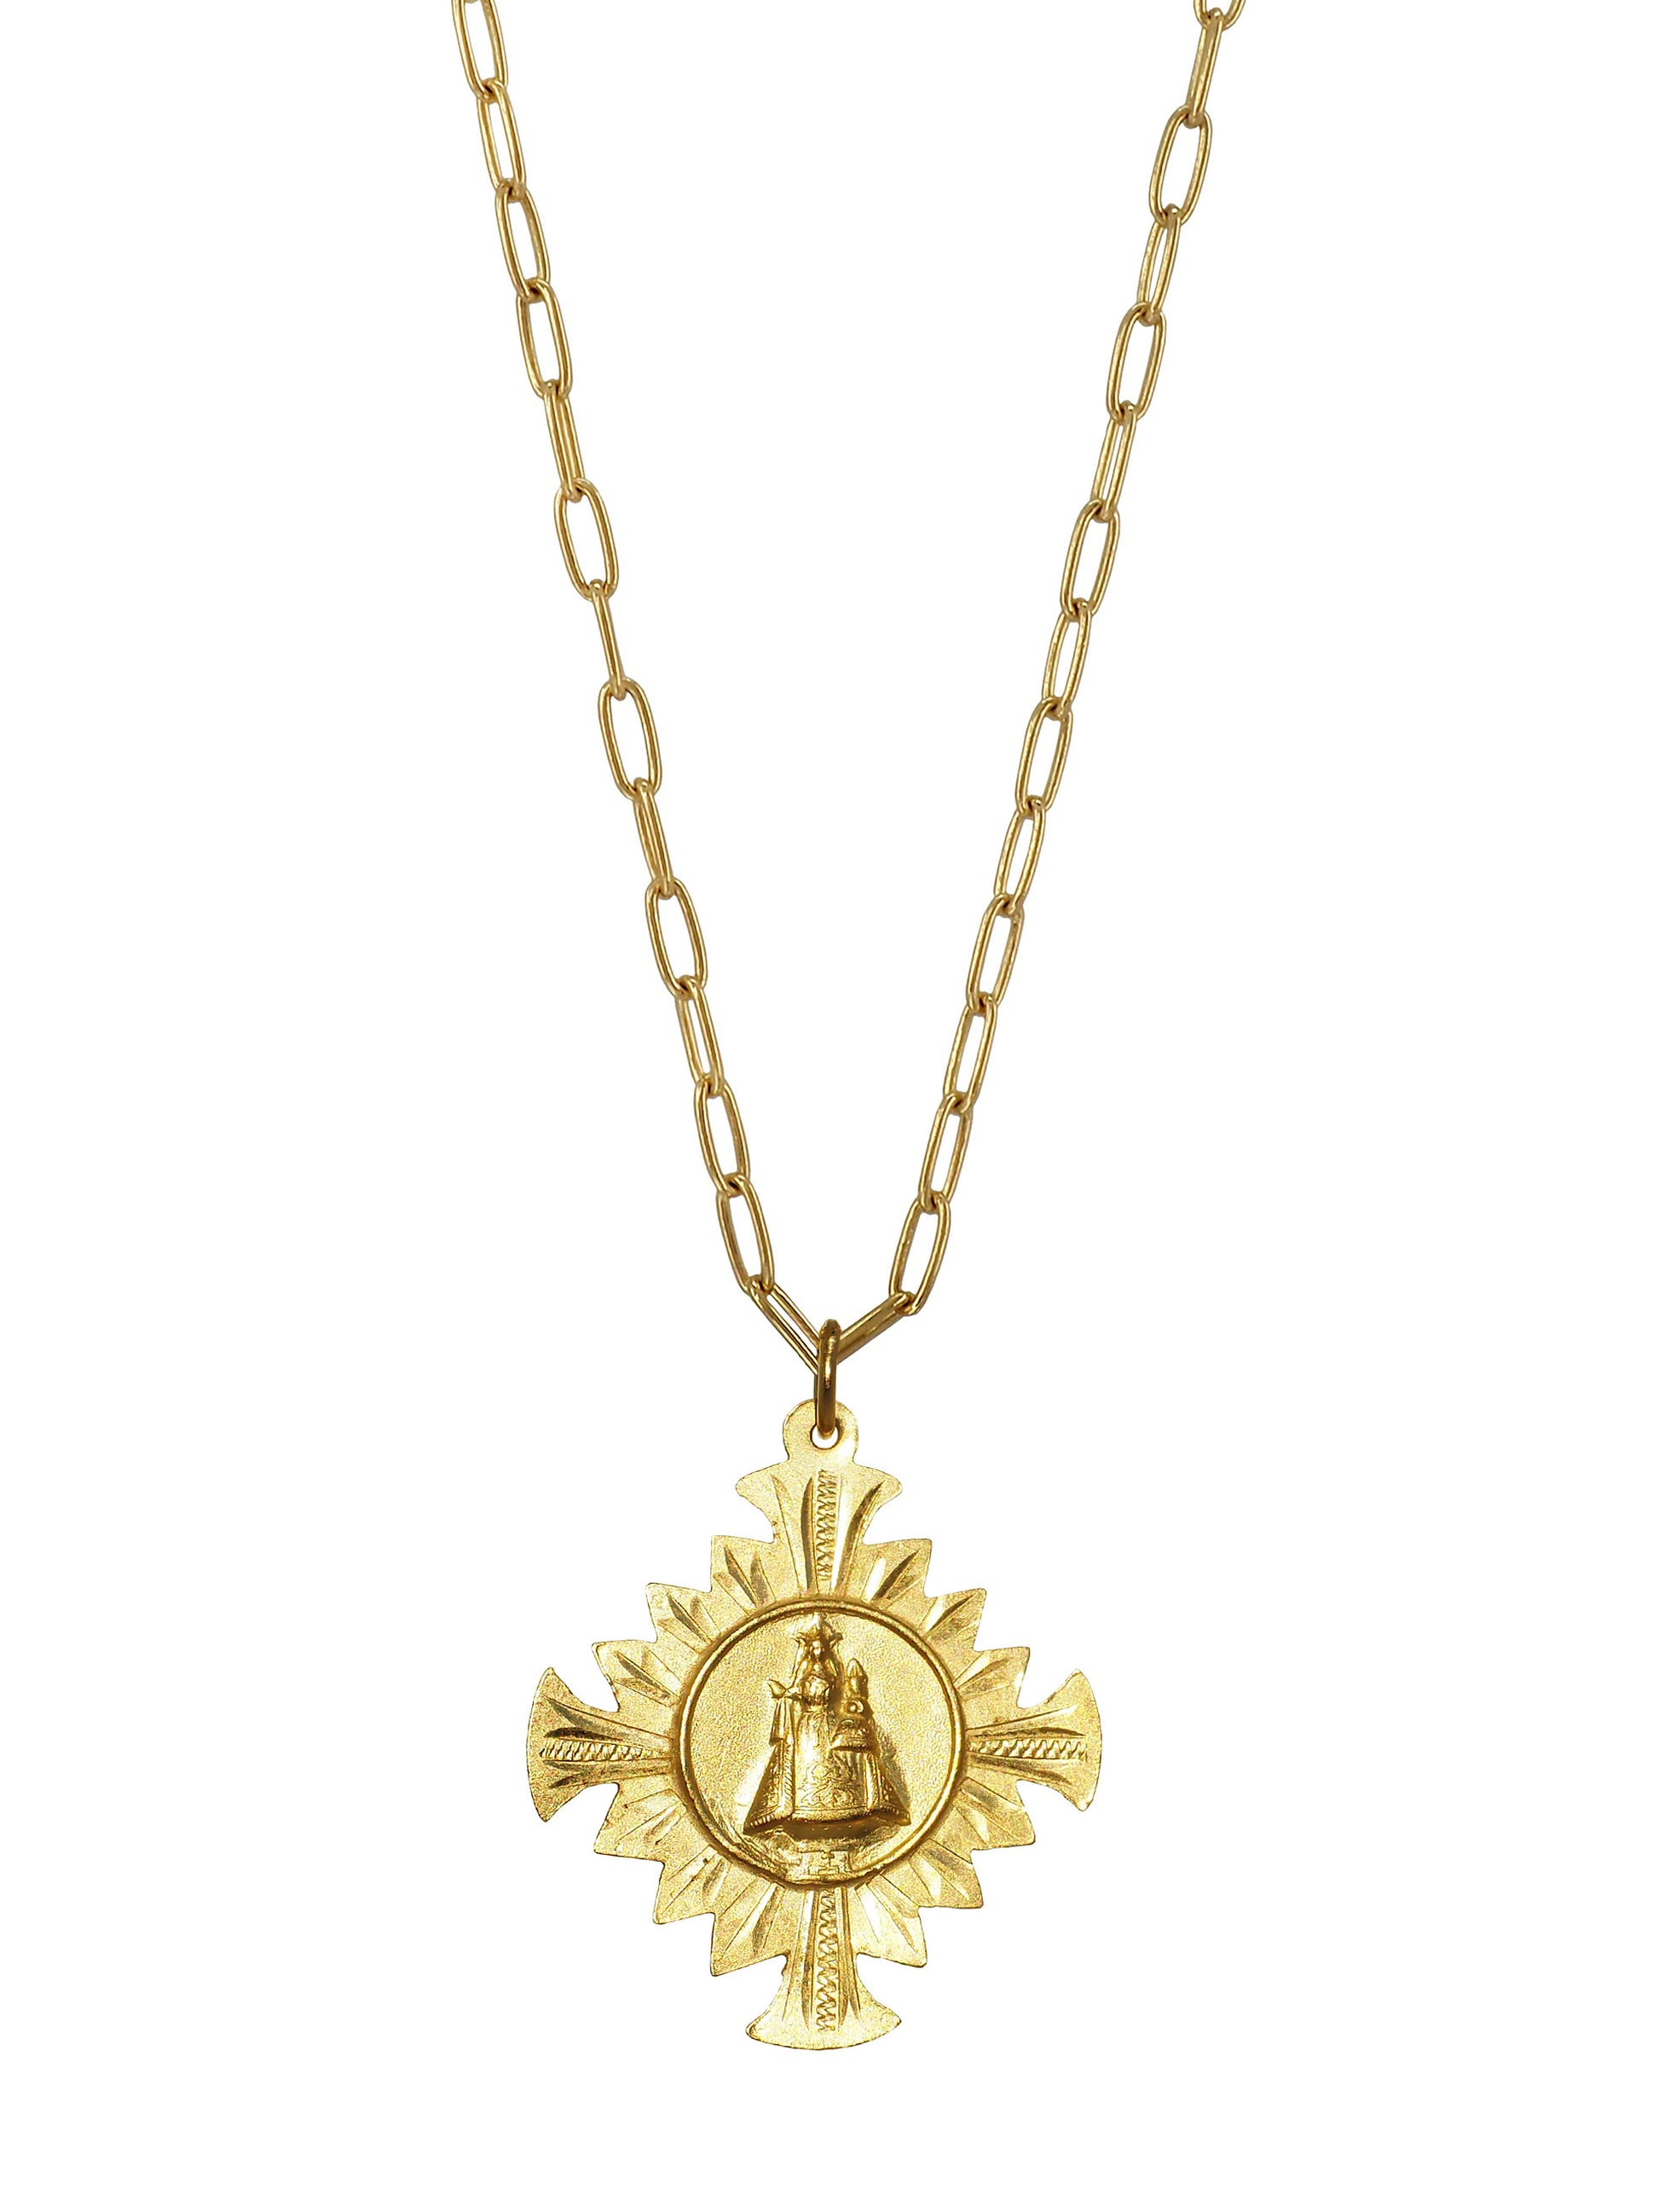 Our Lady of Fontsanta Necklace, Gold plated Sterling Silver, gender neutral